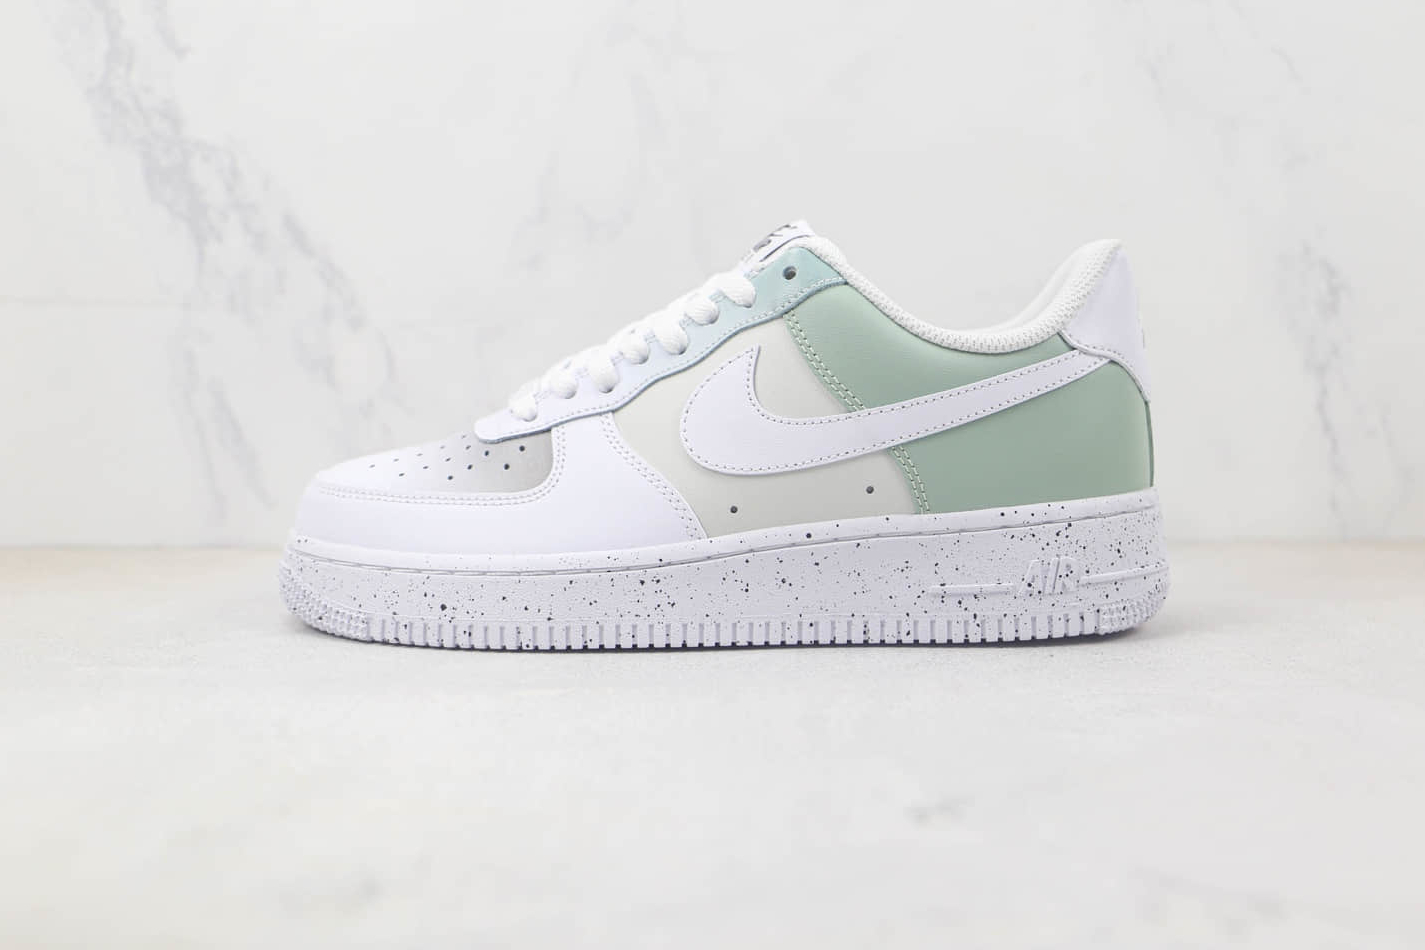 Nike Air Force 1 07 Low White Light Green Grey MM6023-336 - Stylish and Versatile Footwear